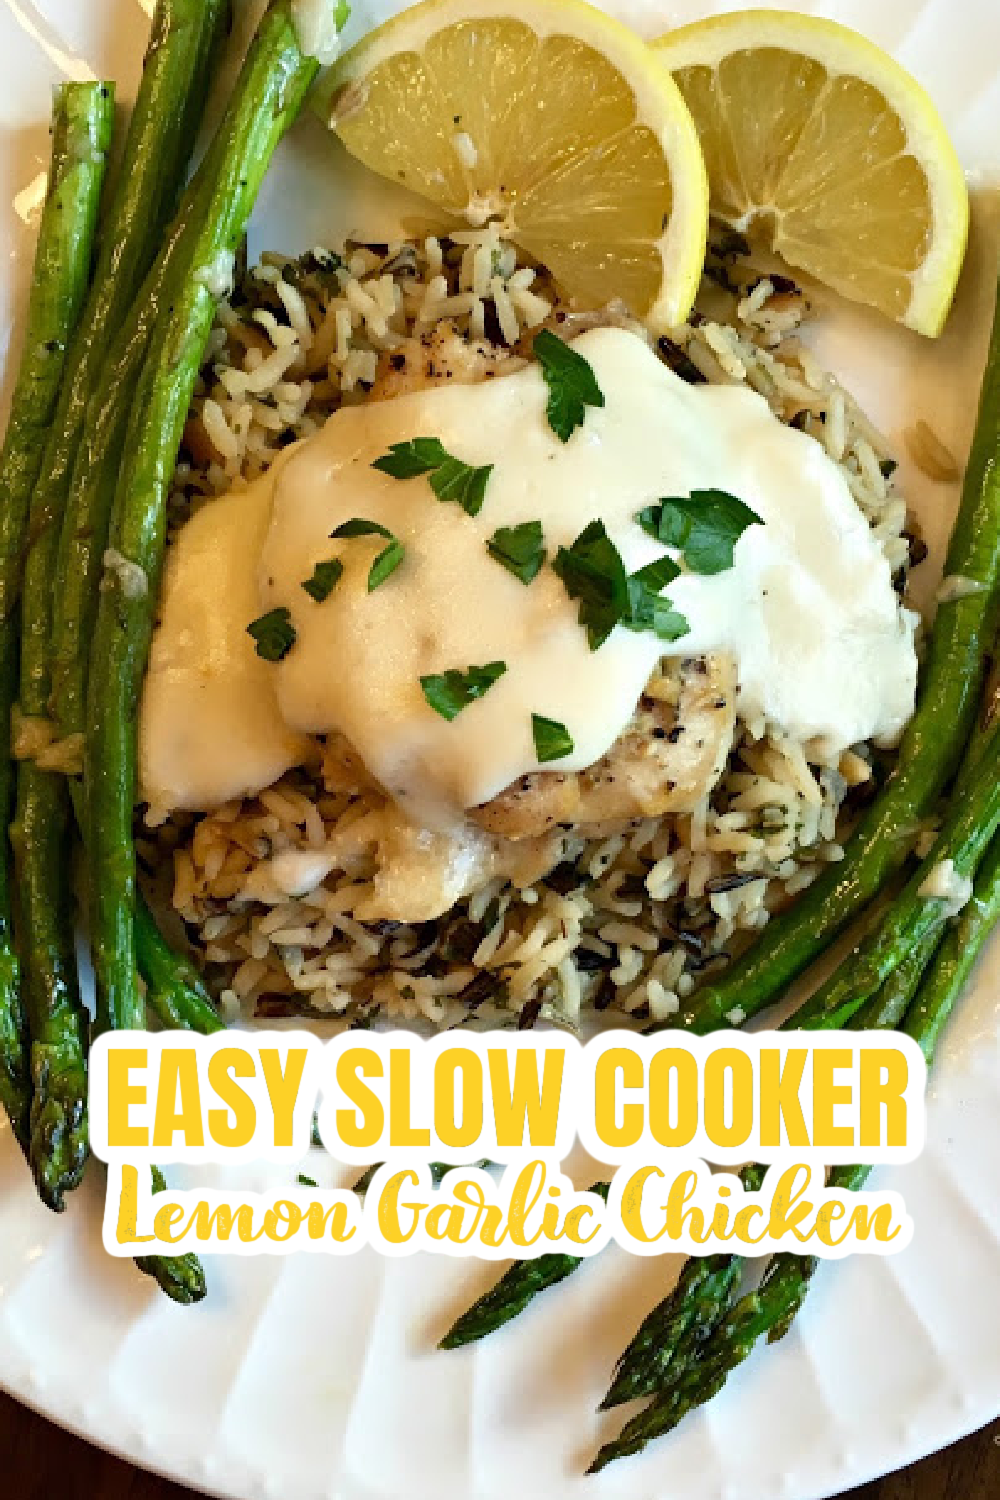 Easy Slow Cooker Lemon Garlic Chicken (Awesome Creamy Sauce)